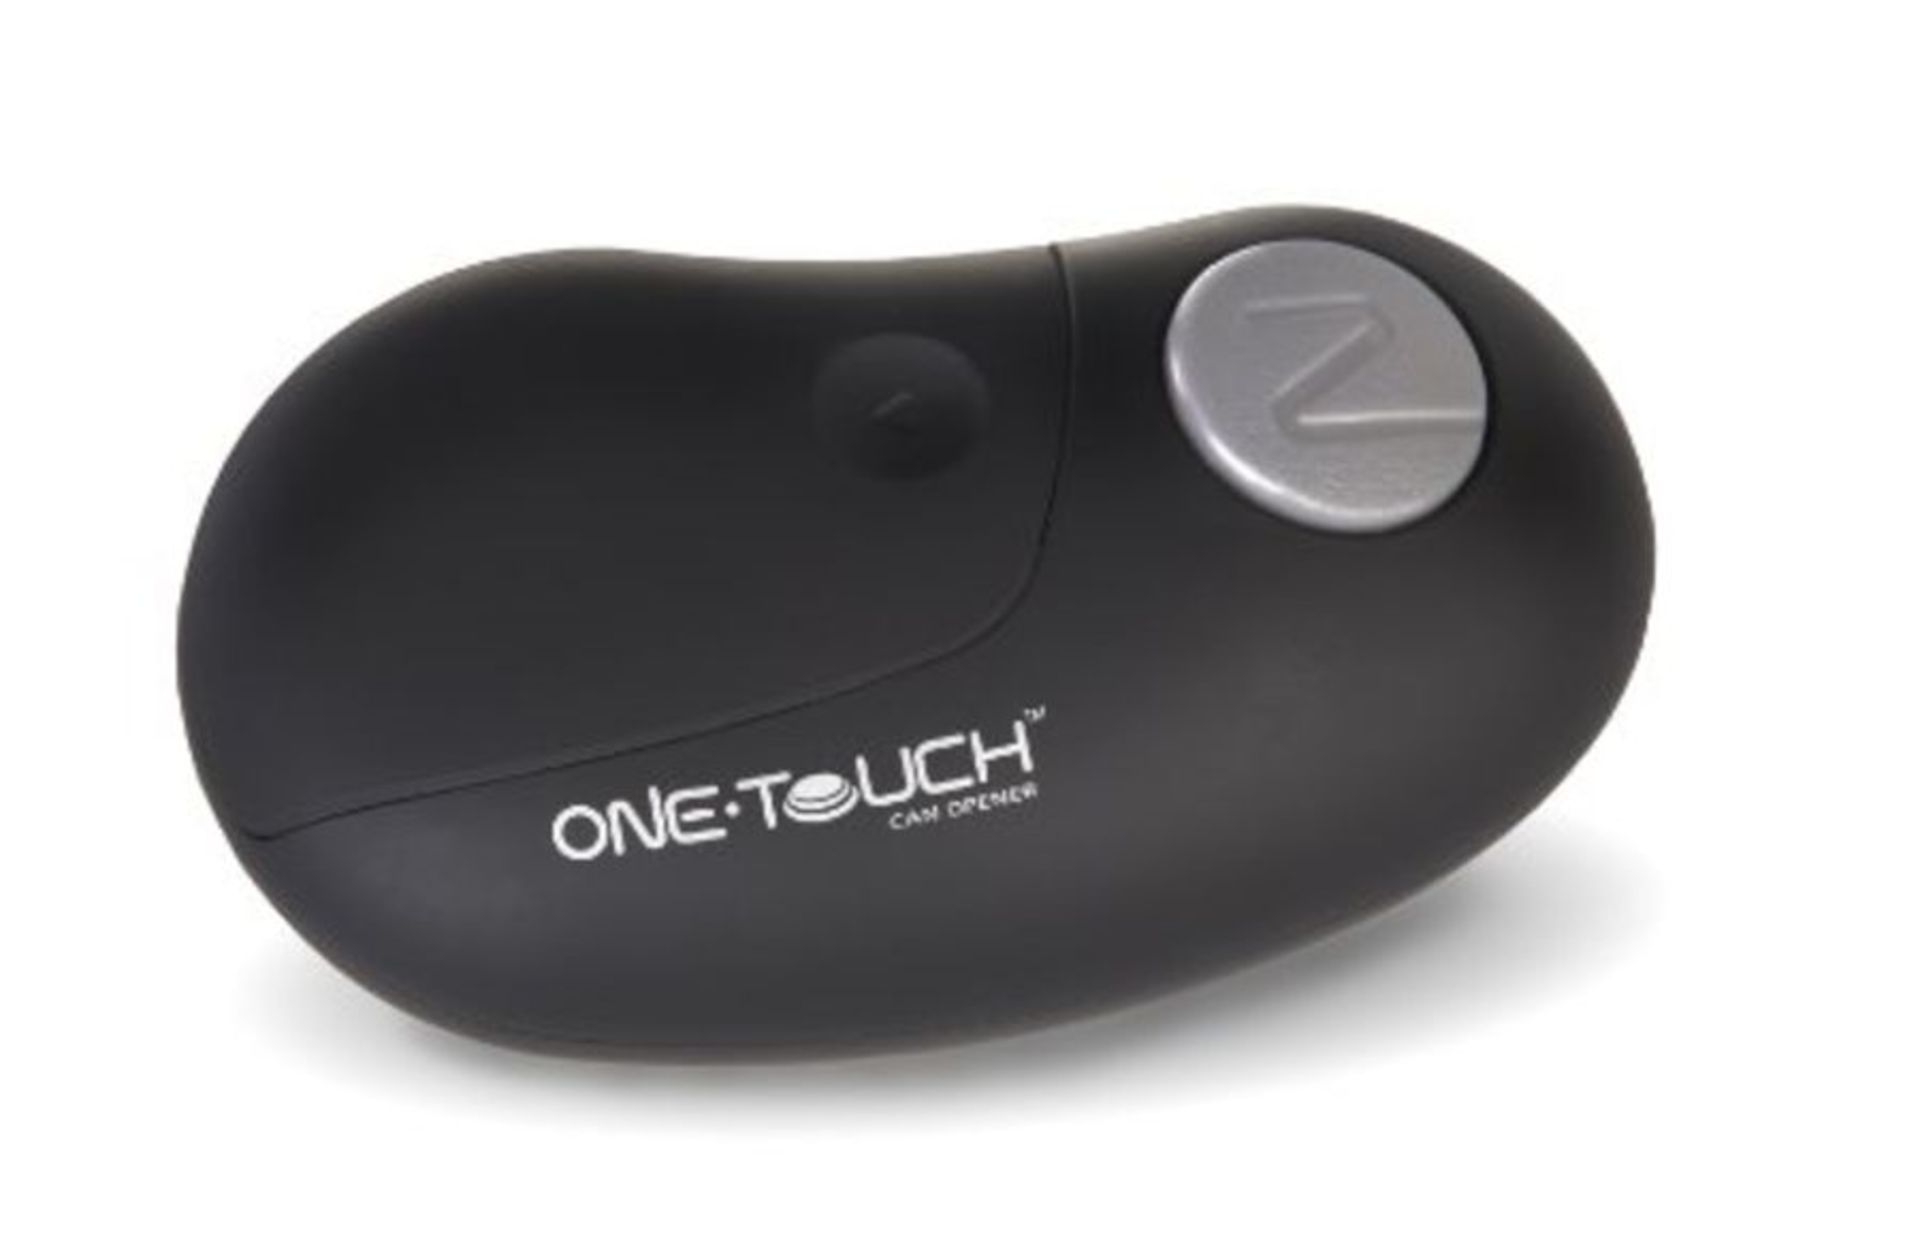 Culinare Black Soft Touch One Touch Automatic Can Opener - Battery operated for hands-